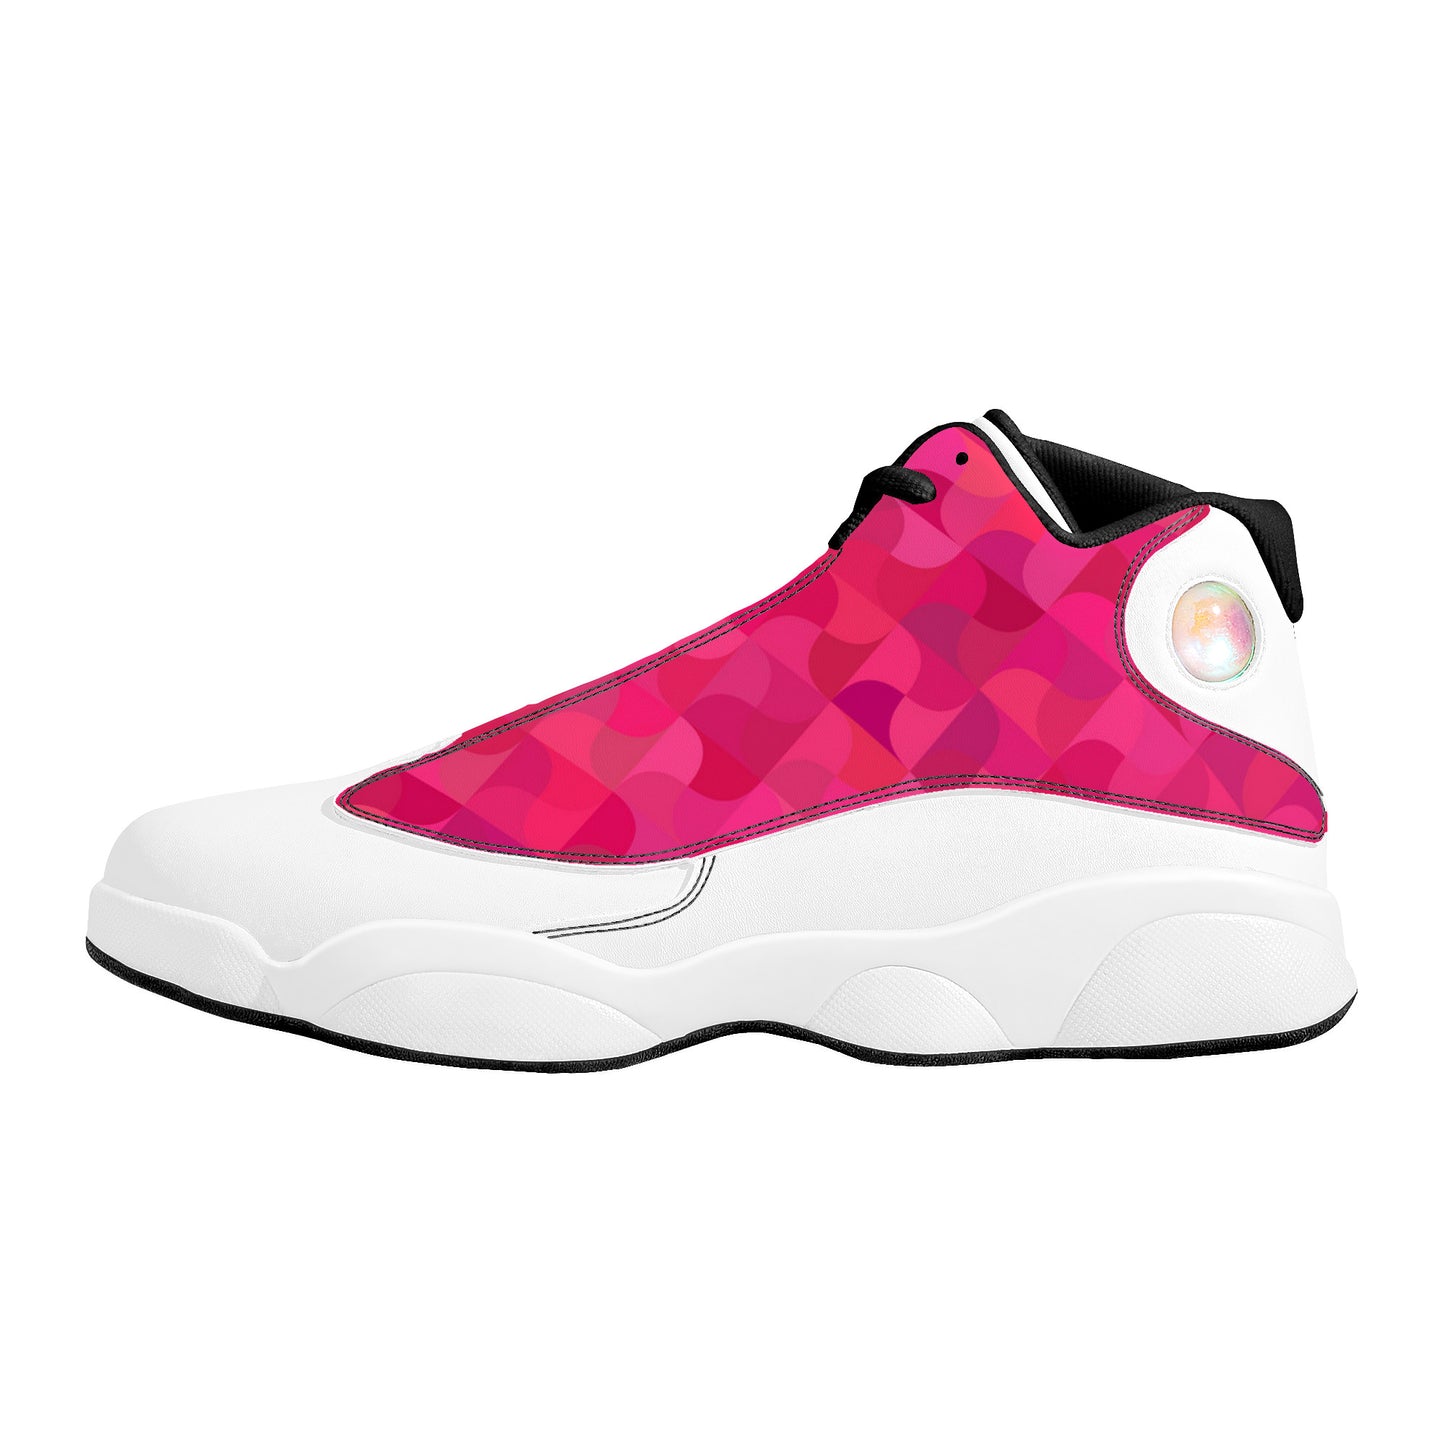 Basketball Shoes - Pink